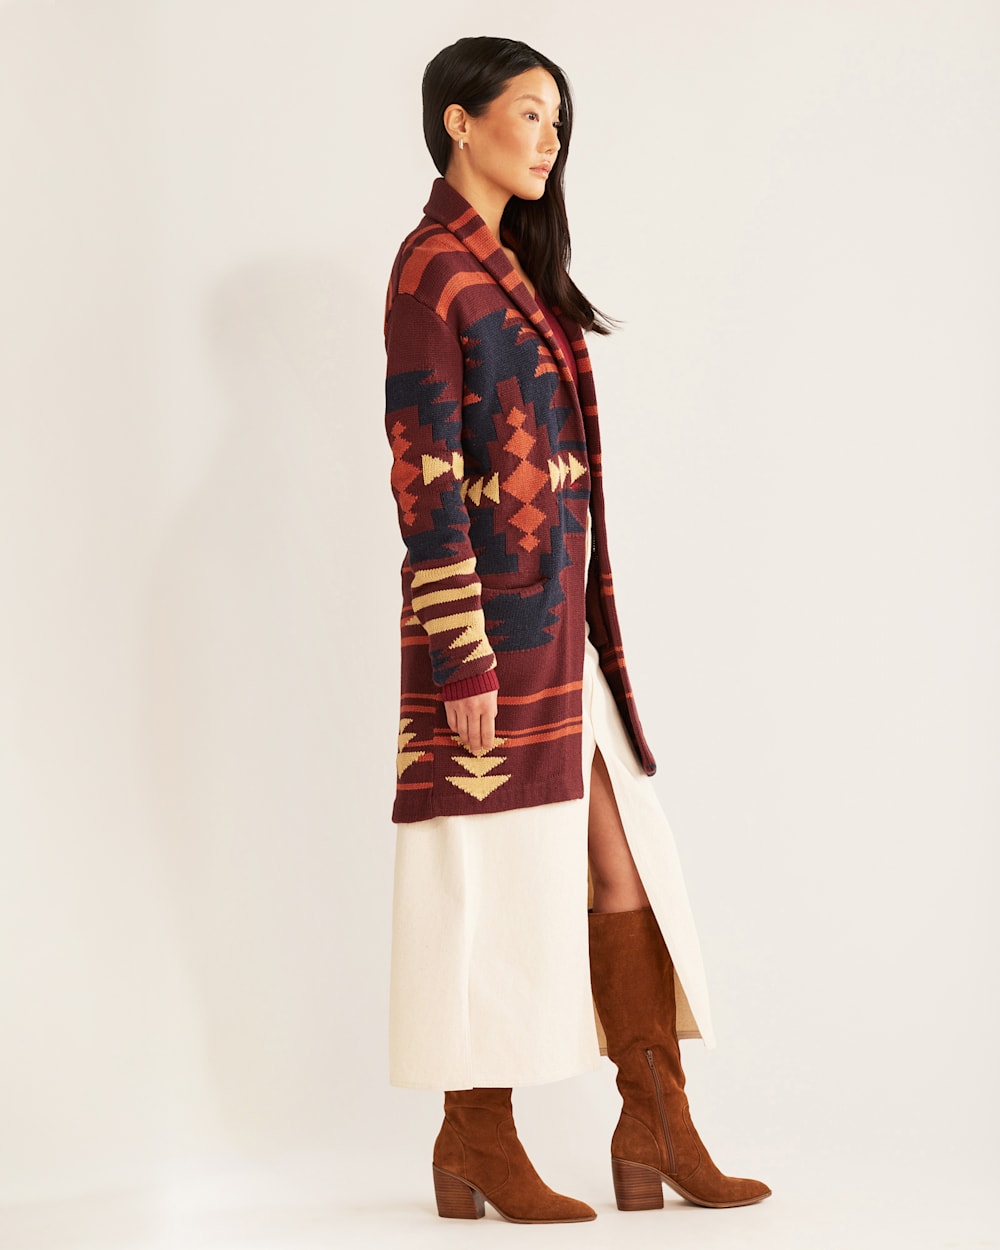 ALTERNATE VIEW OF WOMEN'S GRAPHIC SWEATER COAT IN MAROON MULTI image number 2